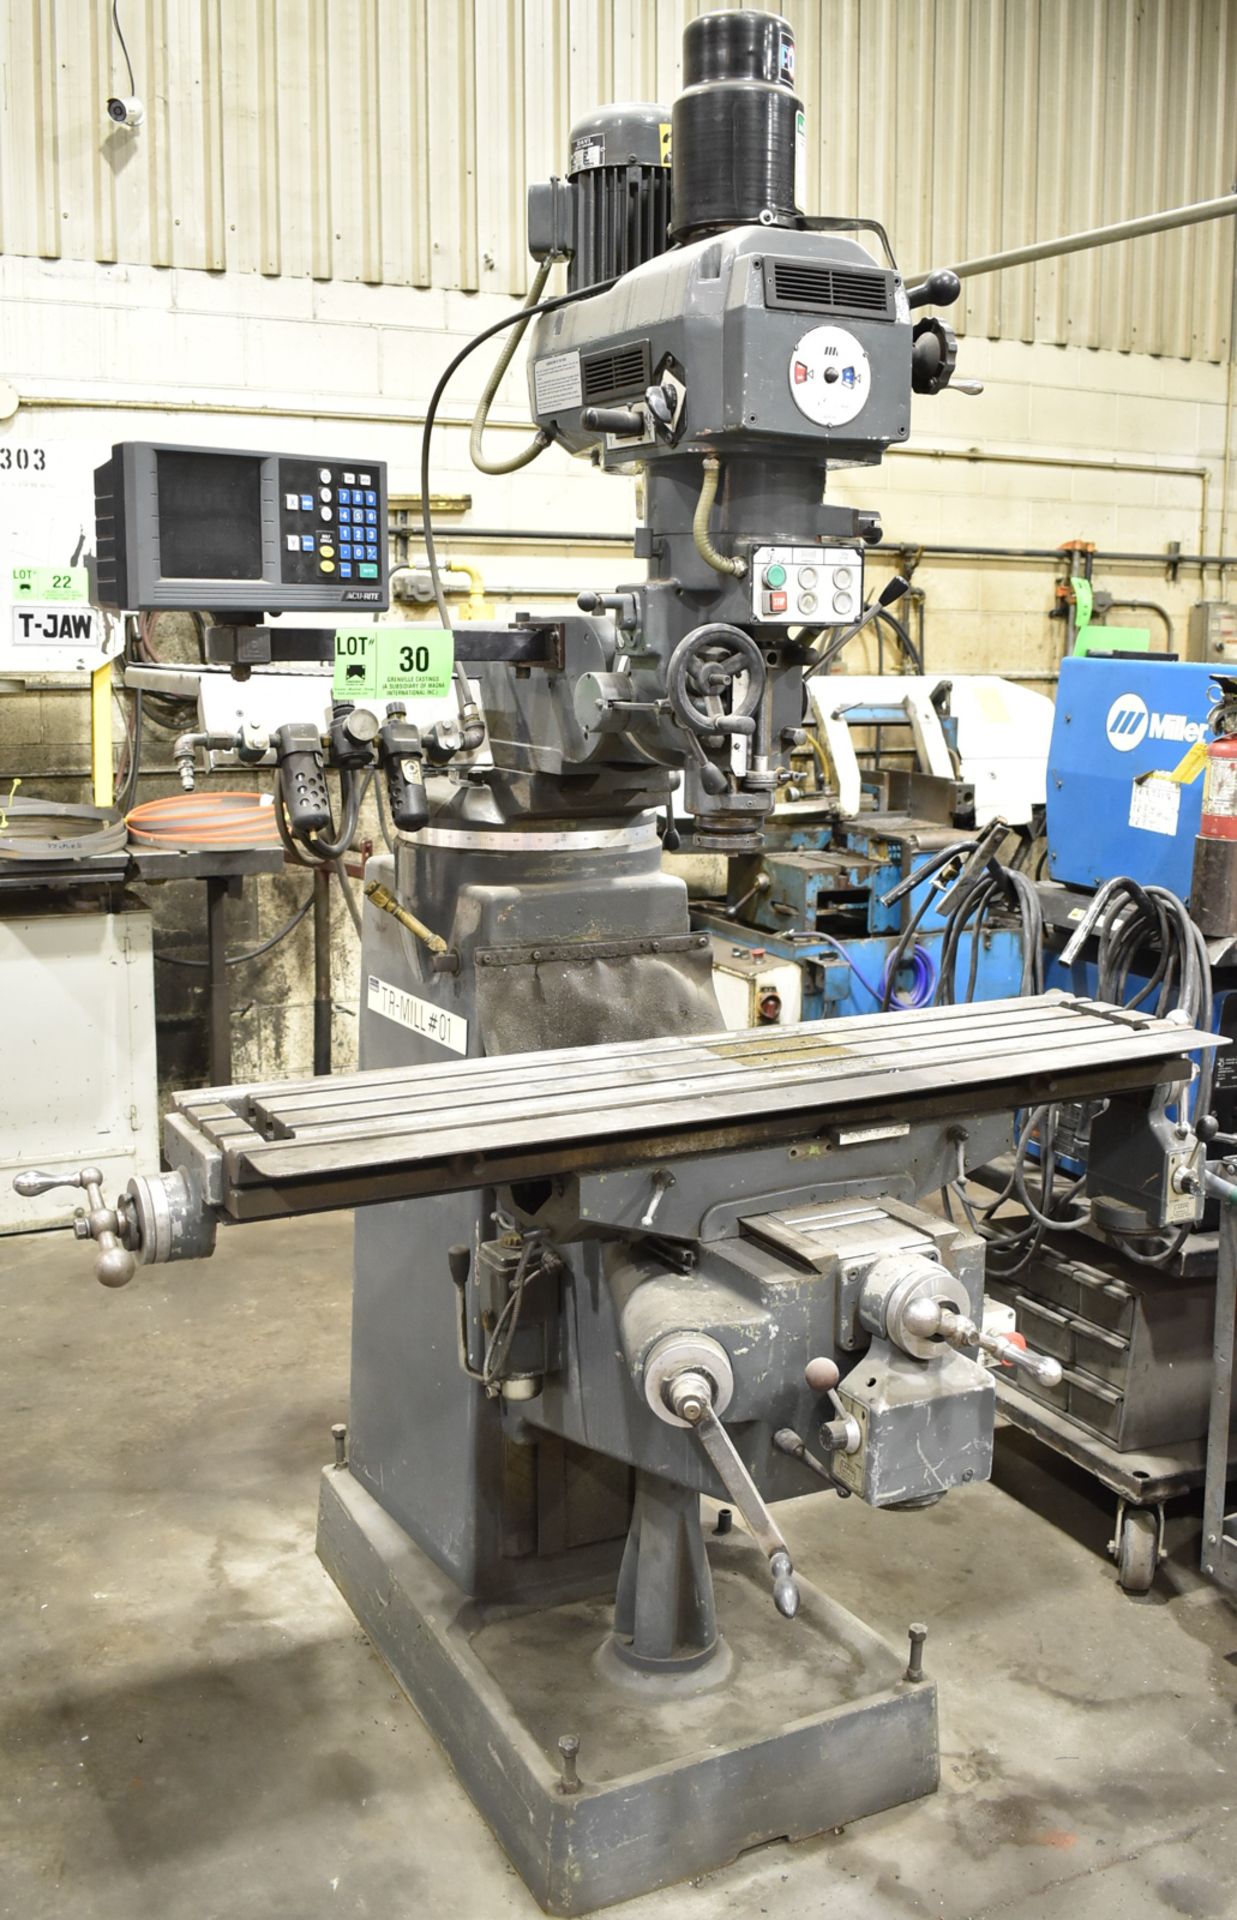 LAGUN FTV-2S VERTICAL TURRET MILLING MACHINE WITH 10"X50" TABLE, SPEEDS TO 4200 RPM INFINITELY